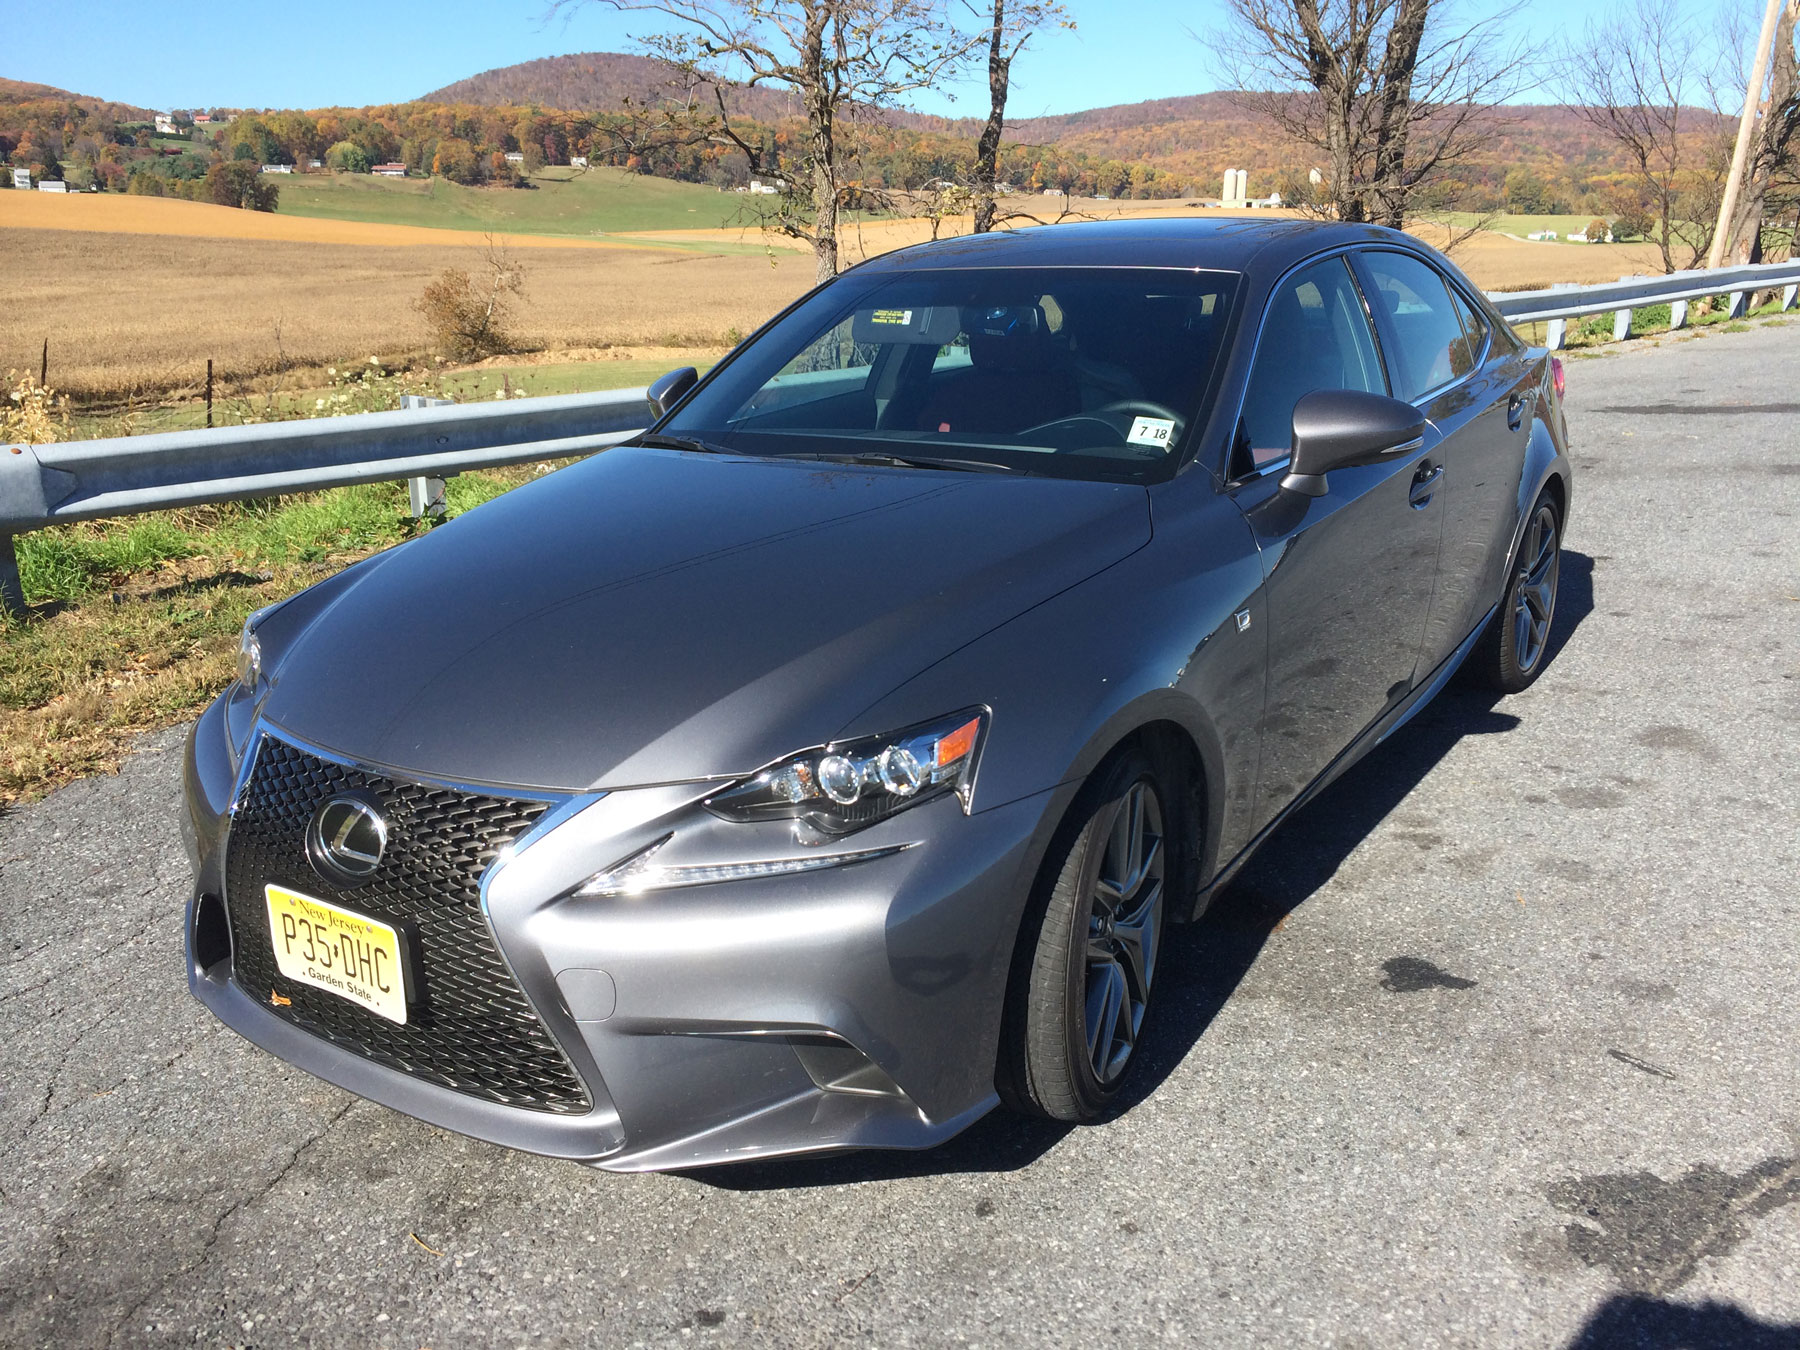 Car Report: Lexus IS350 AWD has a distinctive new look and interior